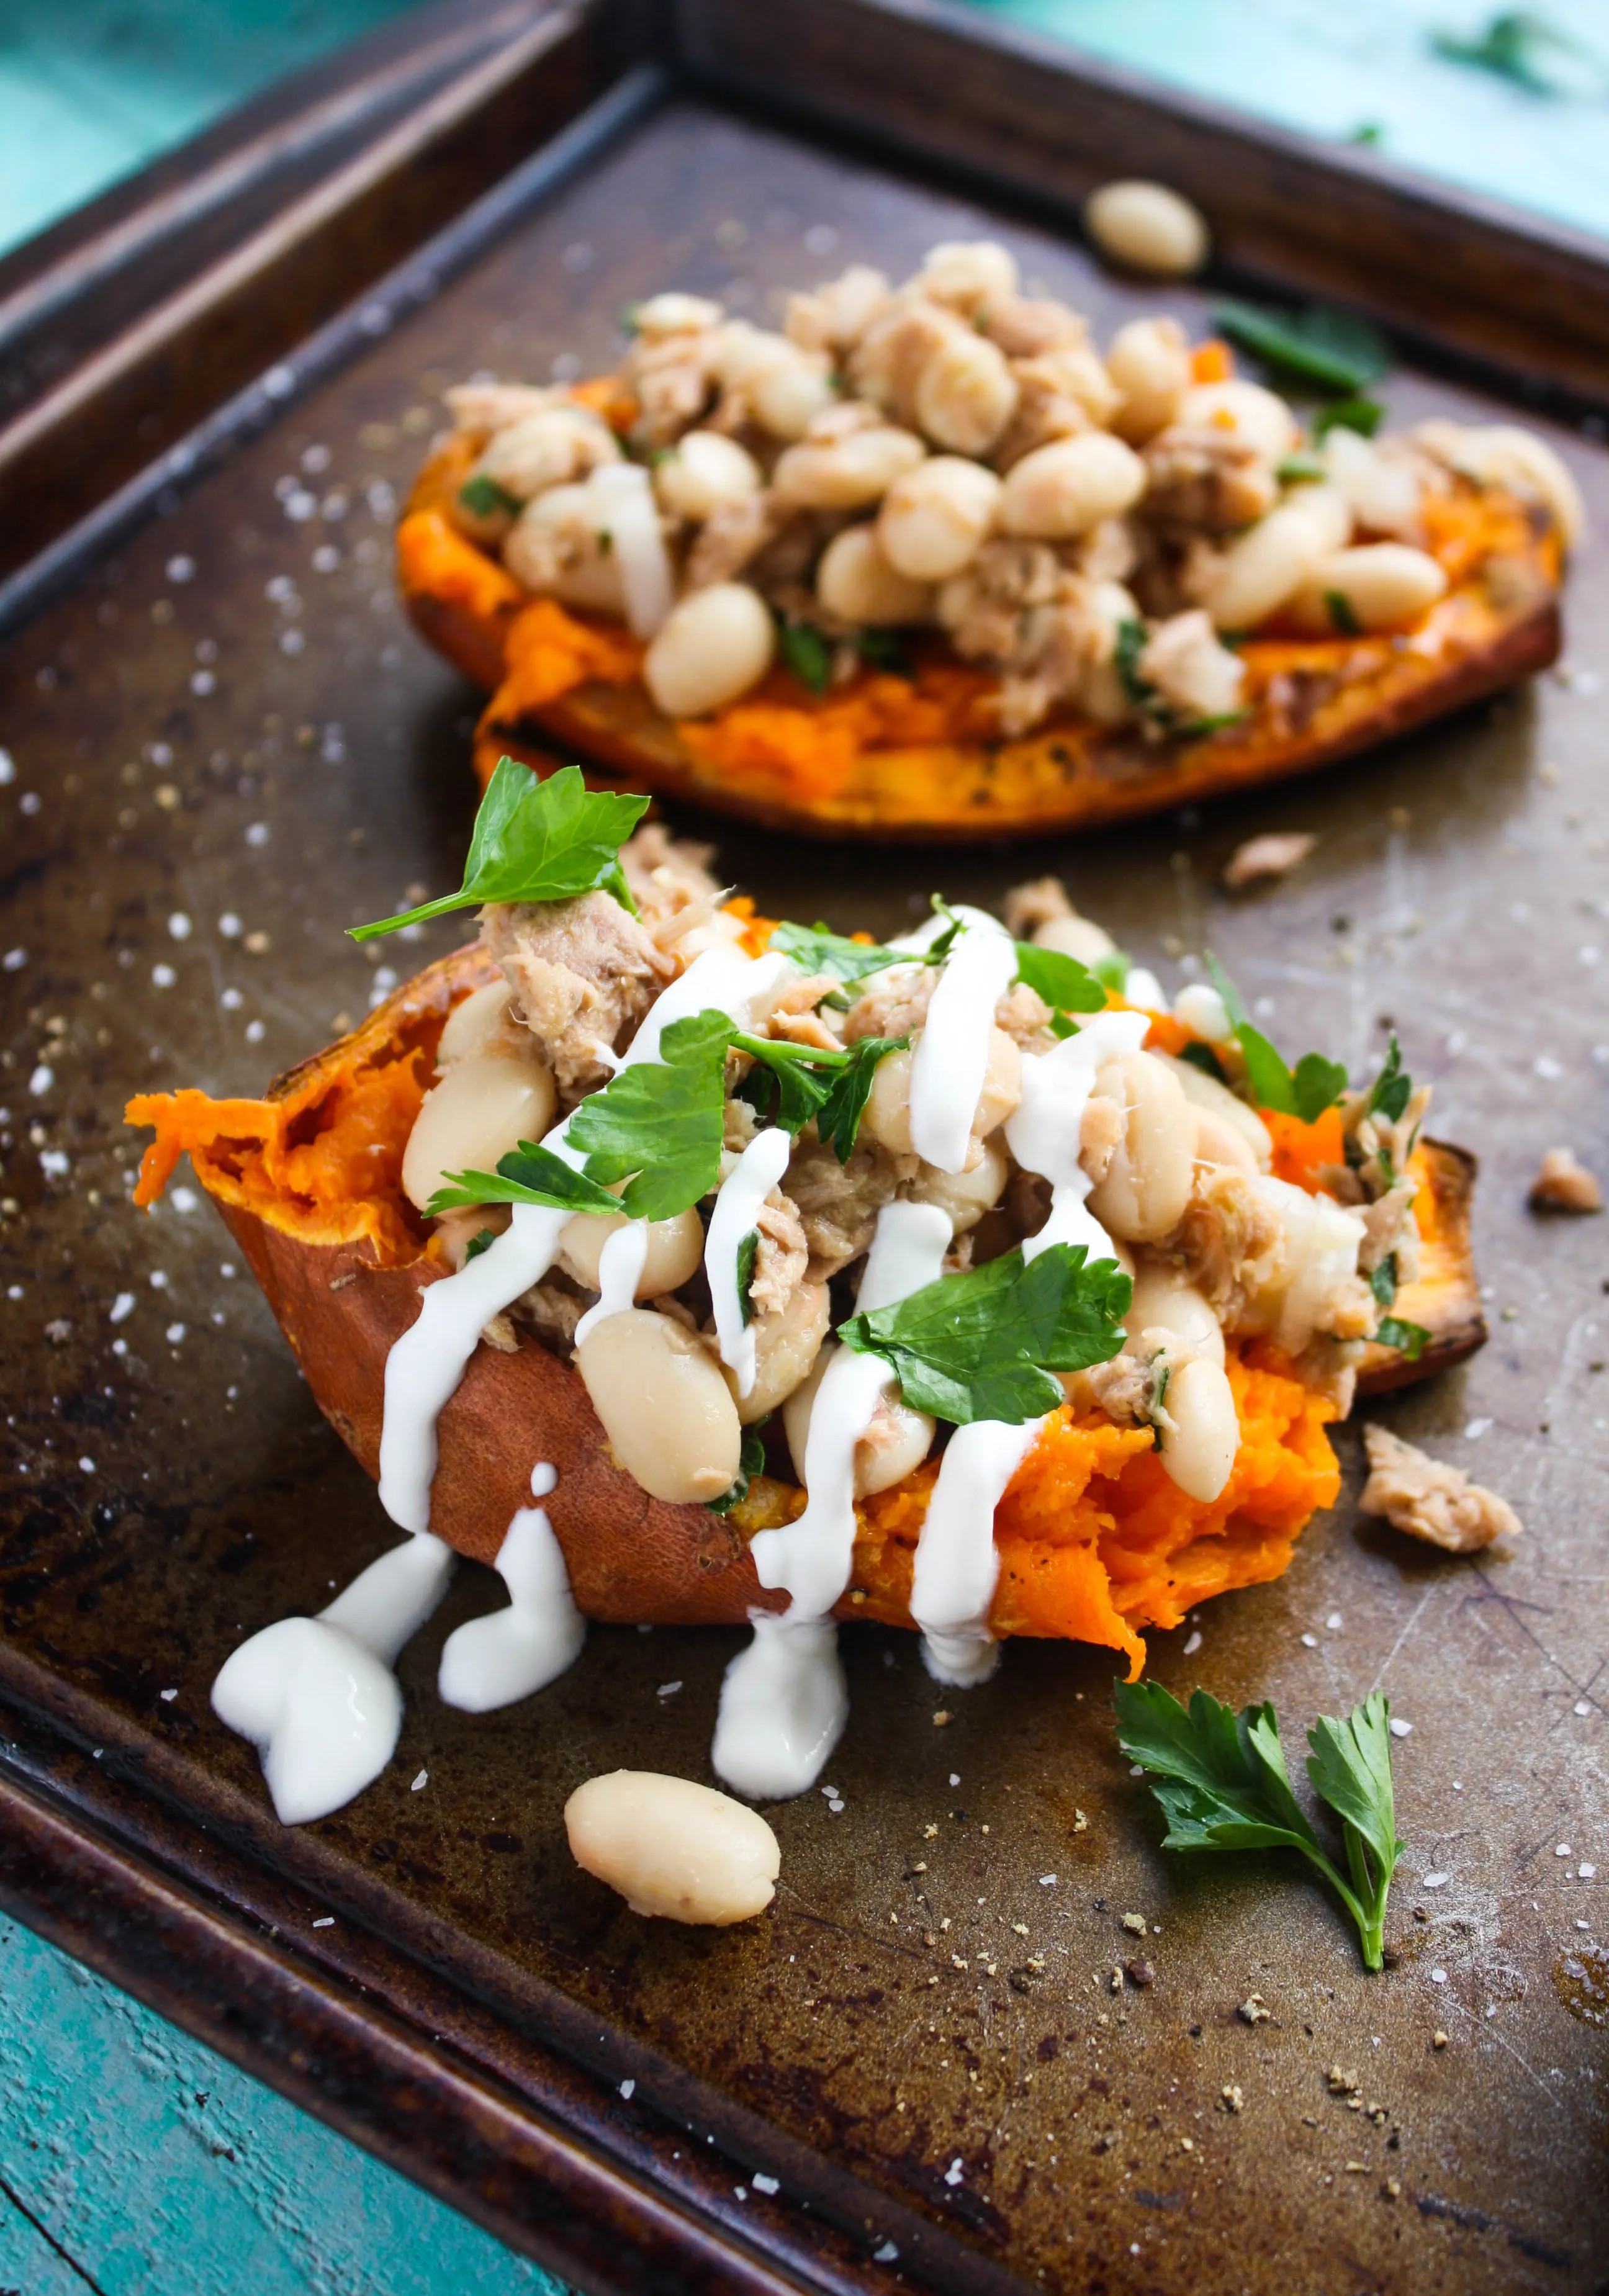 Stuffed Sweet Potatoes with Tuna and Beans make a fabulous go-to meal when you want something without the fuss. These stuffed sweet potatoes are delicious!